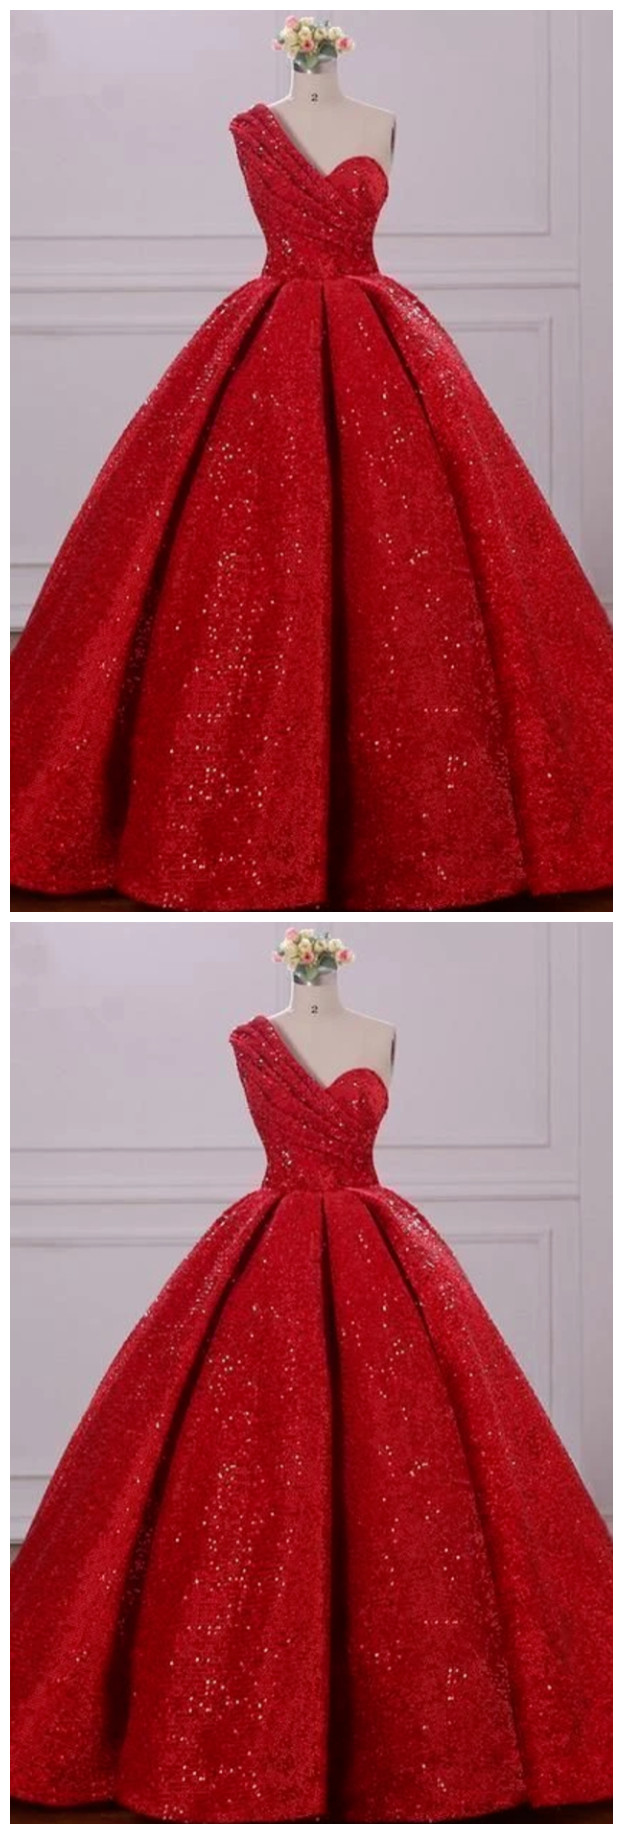 Sassy Wedding Ball Gown One Shoulder Sequins Red Sweetheart Prom Dresses,quinceanera Dresses